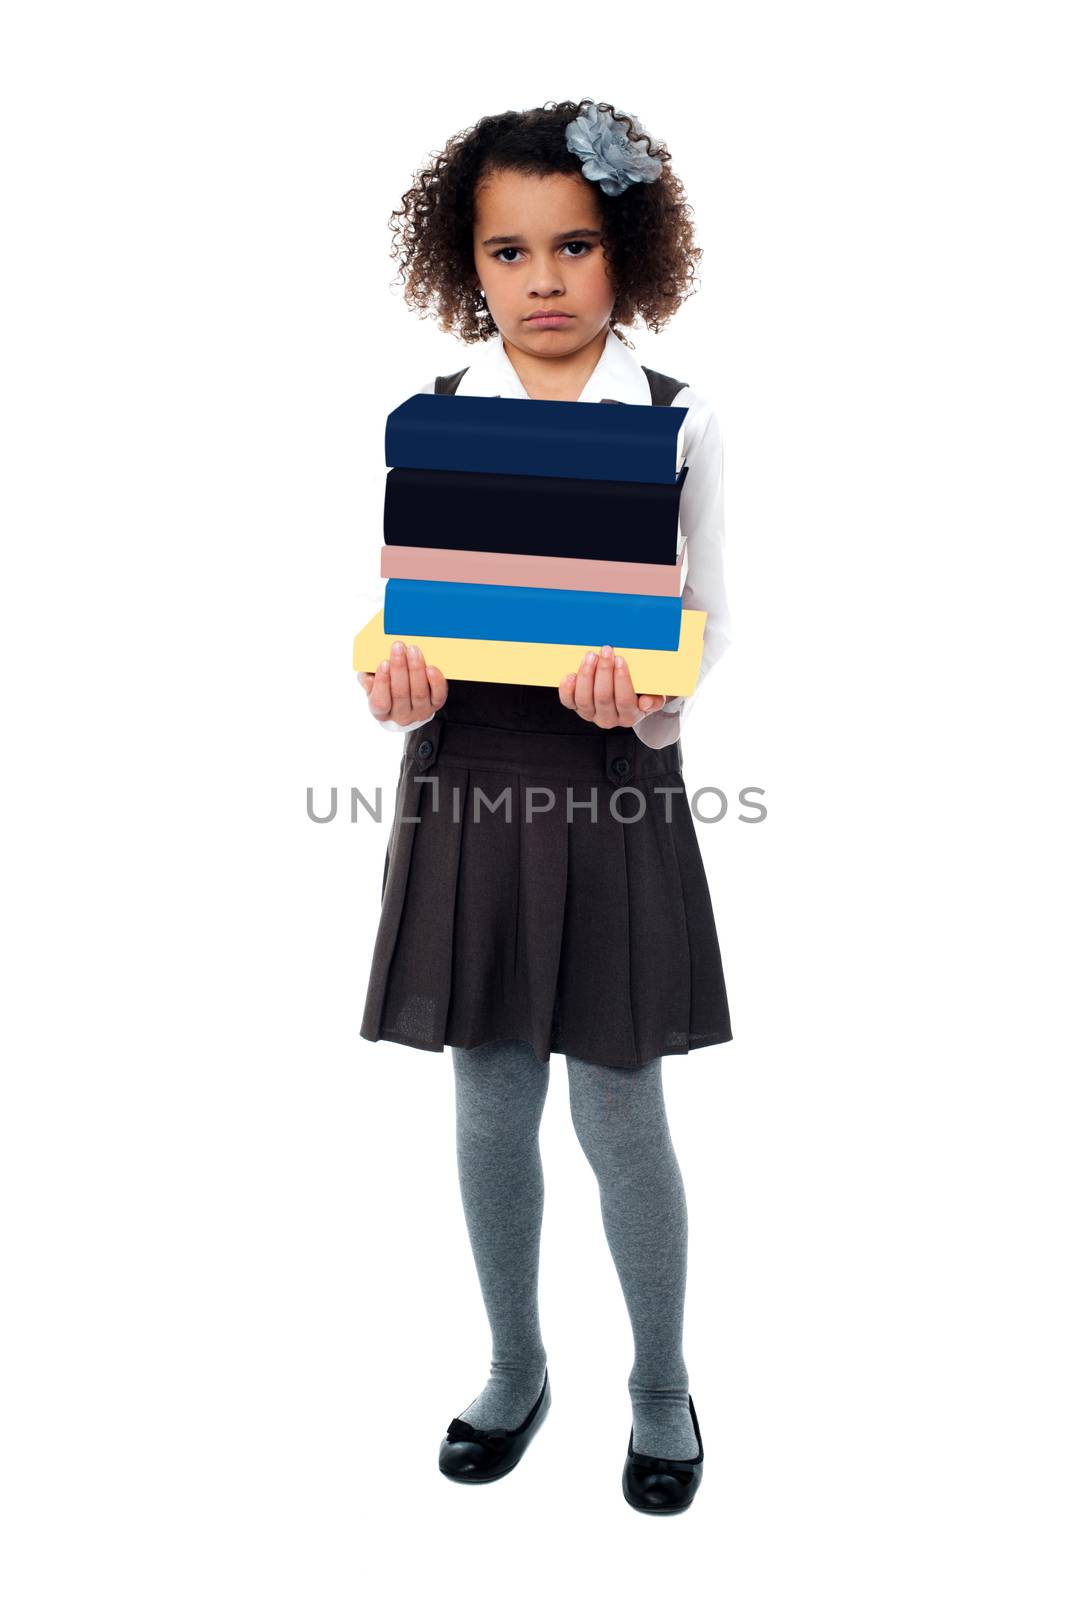 Unhappy girl holding stack of school books